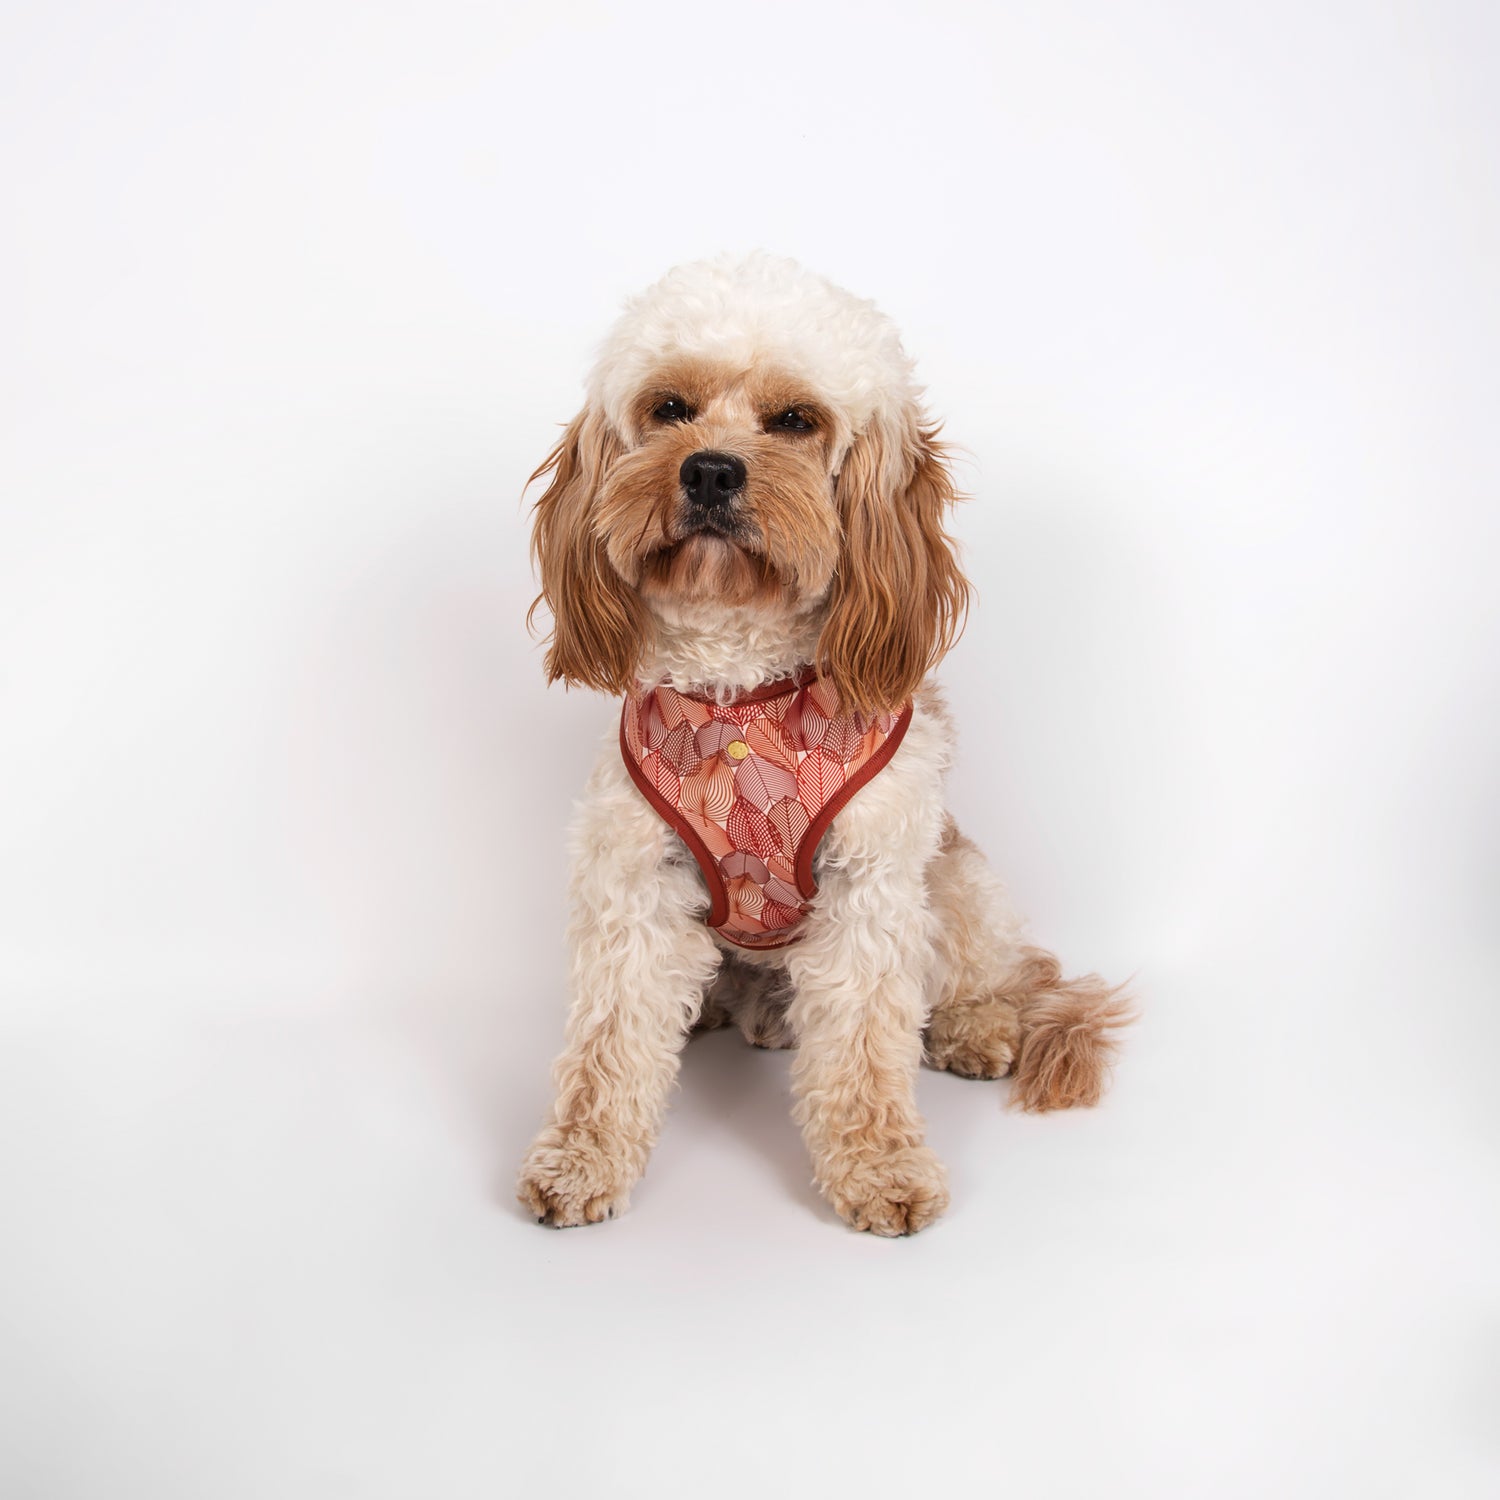 Pata Paw autumn crunch reversible harness as seen in a medium-sized dog.